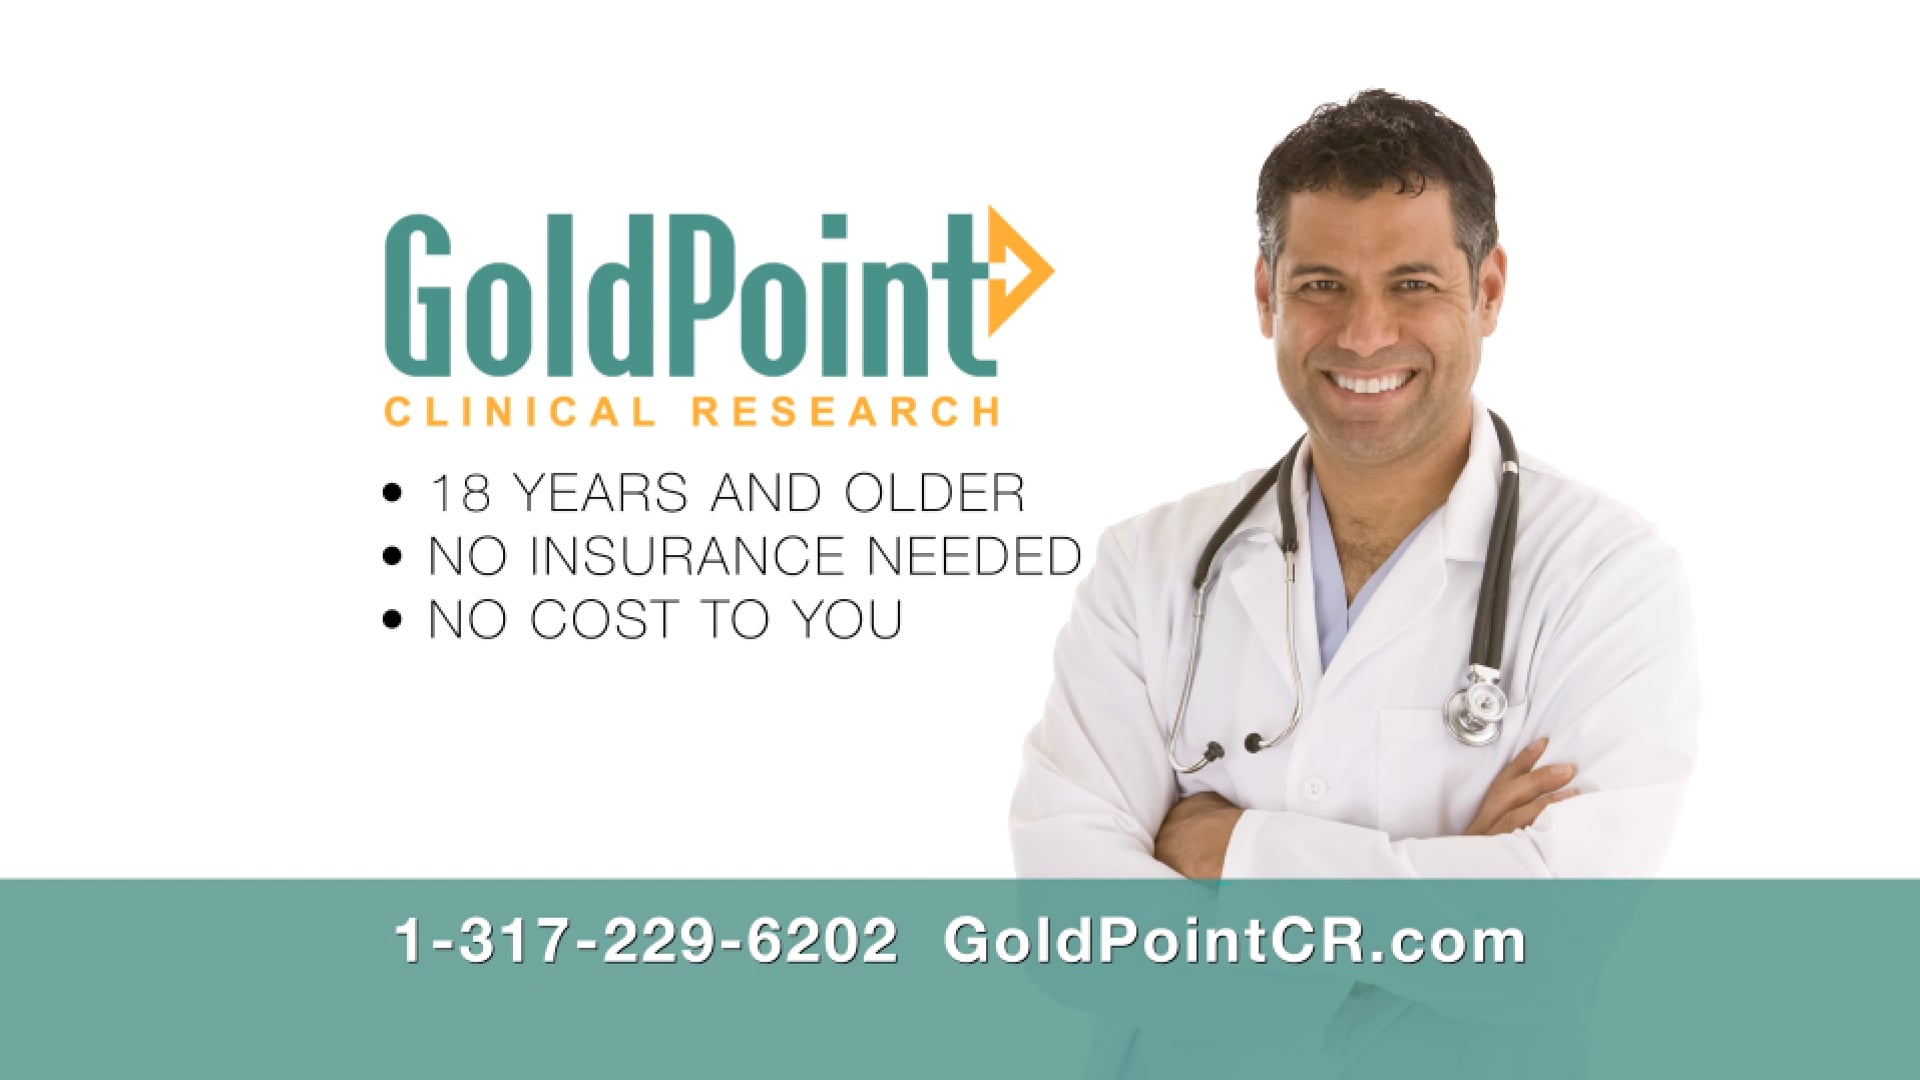 GOLDPOINT CR - Depression Study